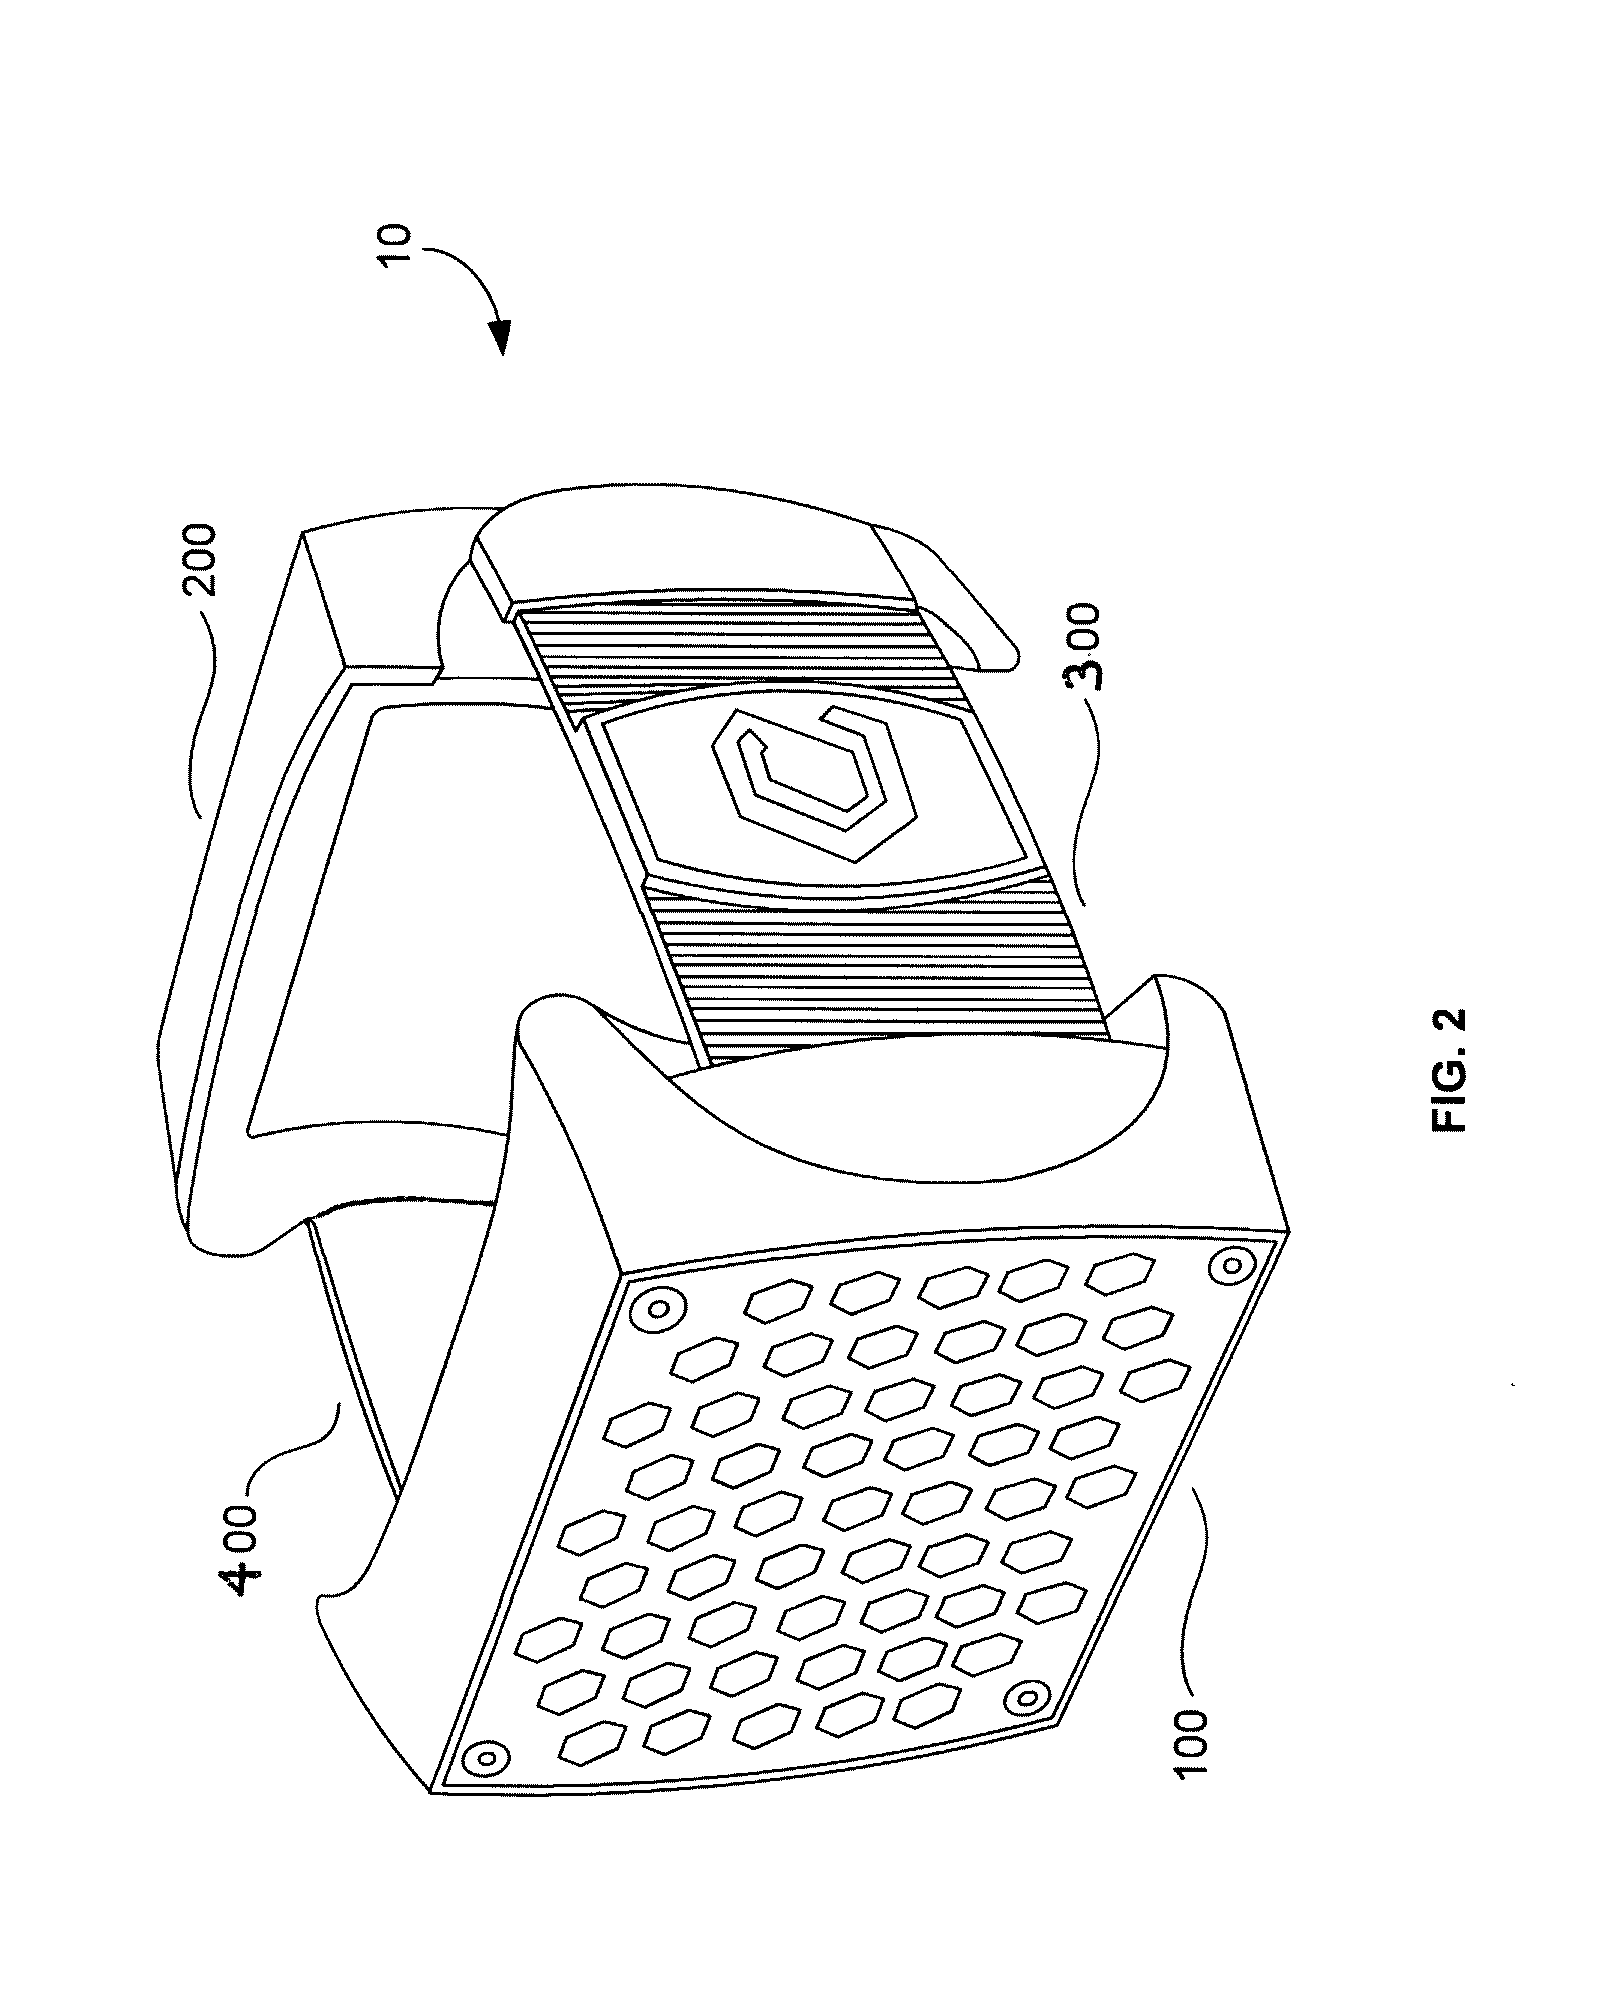 Device for Providing Body Temperature Regulation and/or Therapeutic Light Directed to Vasculature